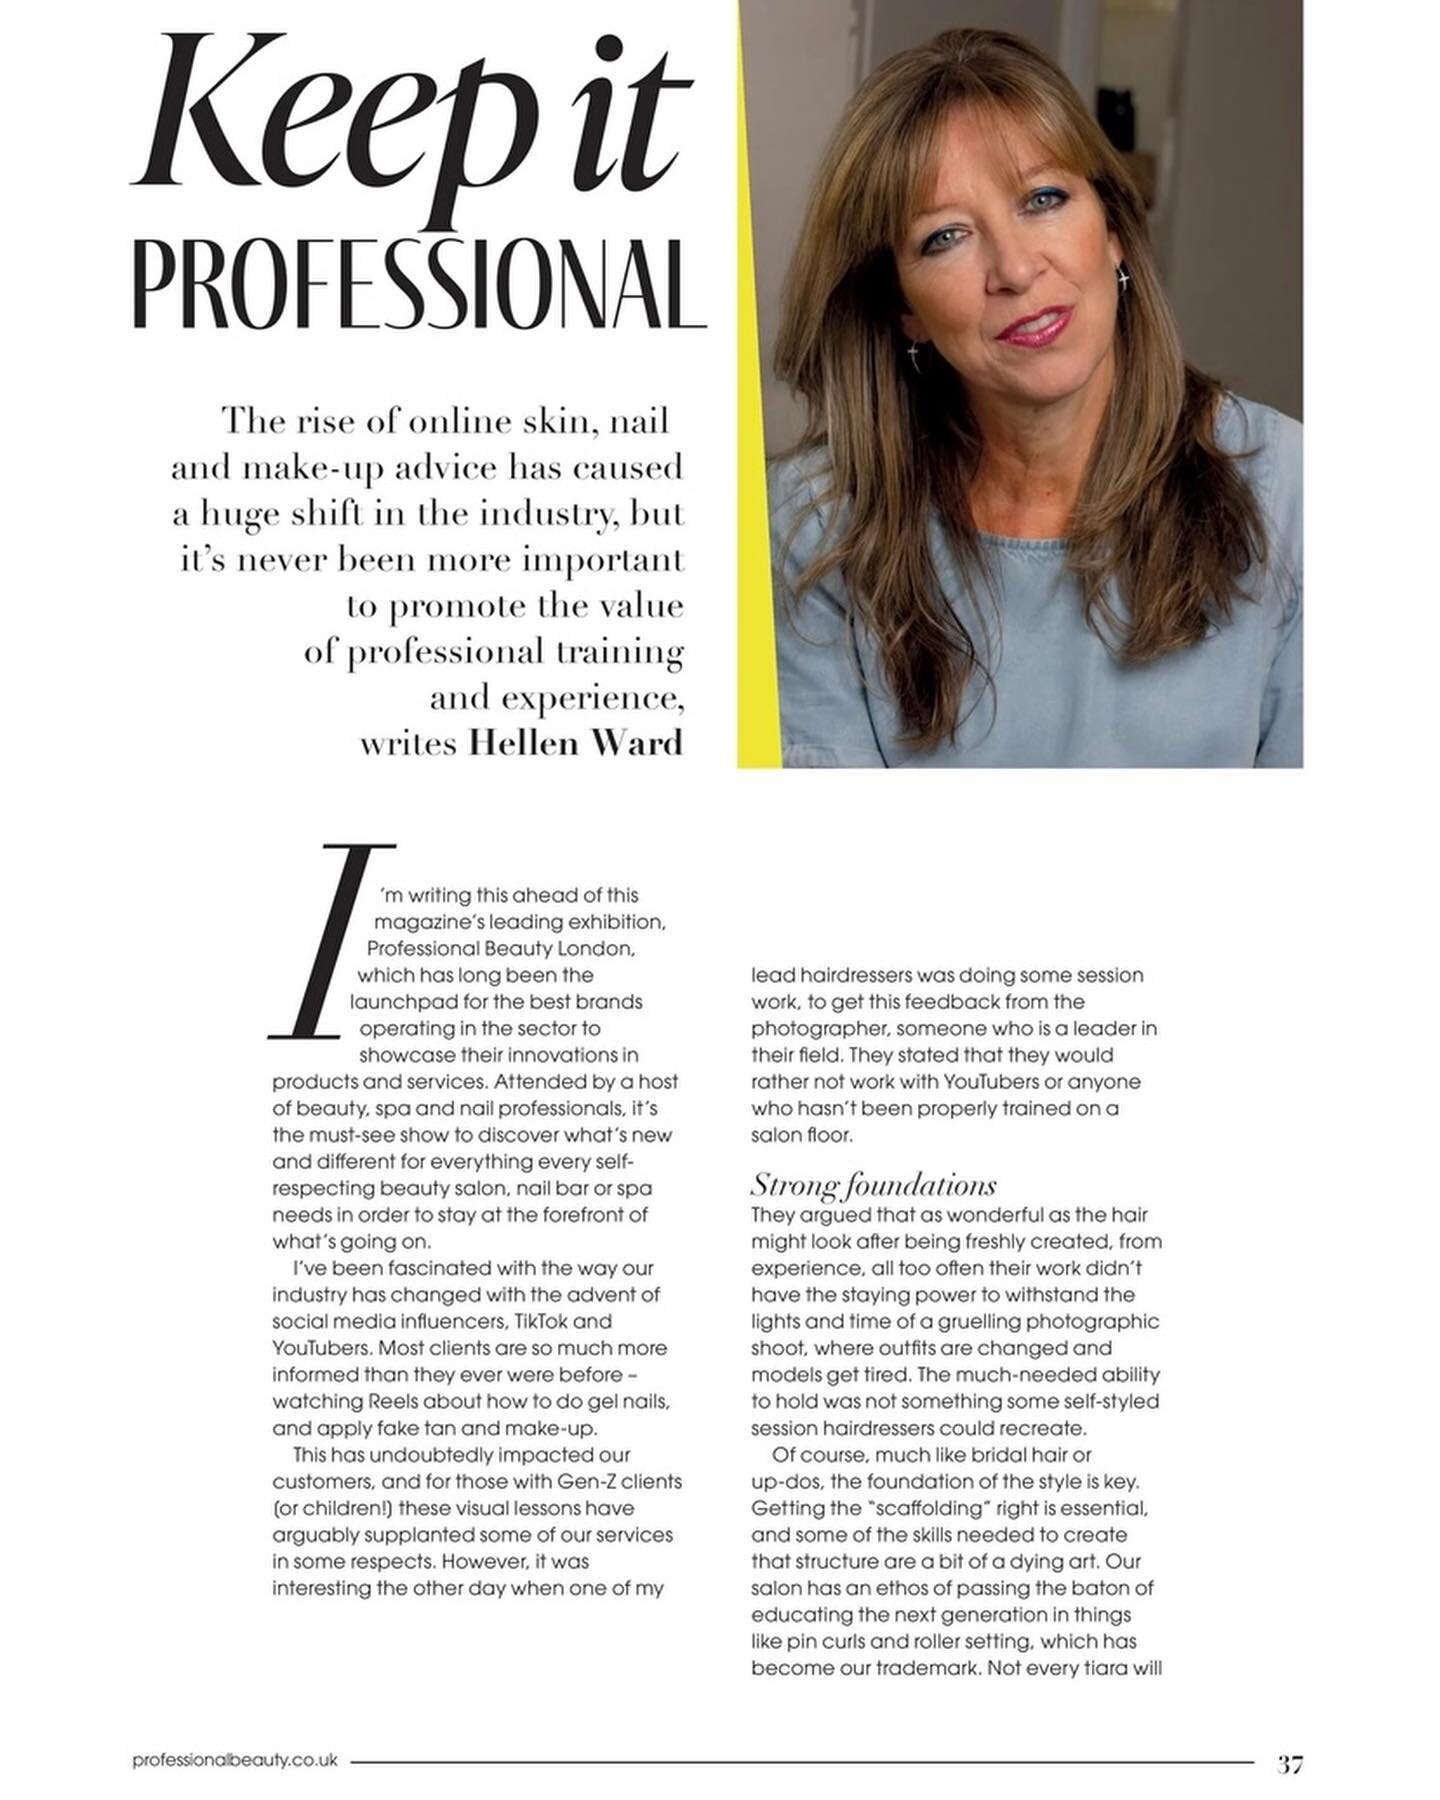 Check out my new column for @professionalbeauty.uk xx